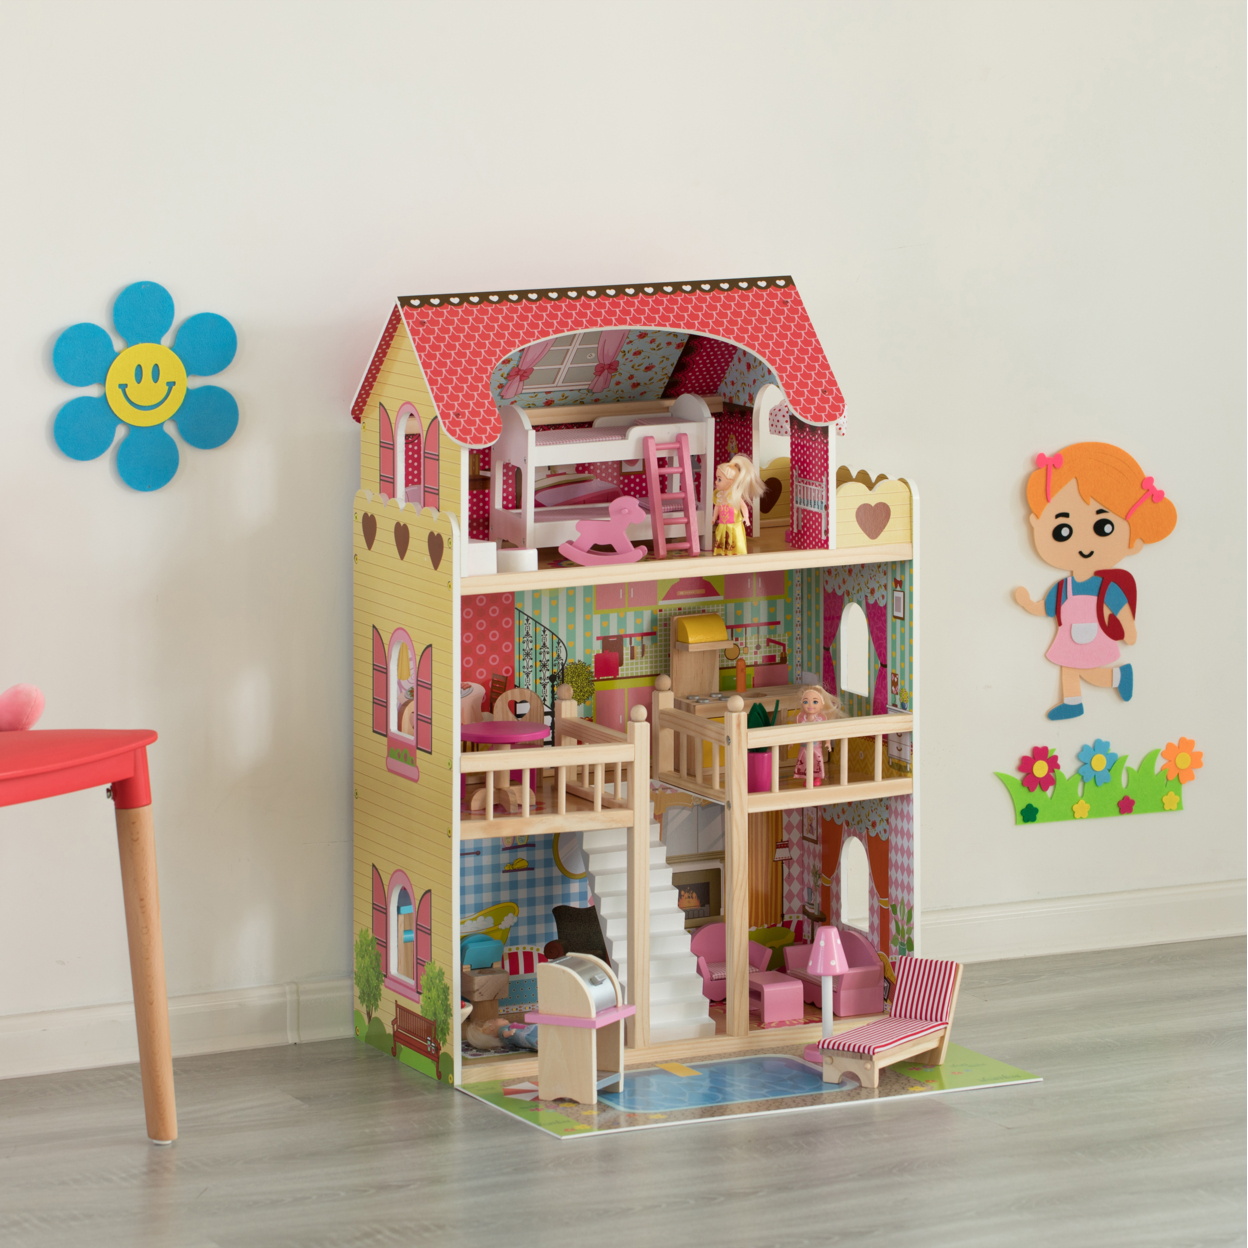 Wooden Doll House With Toys And Furniture Accessories With LED Light For Ages 3+